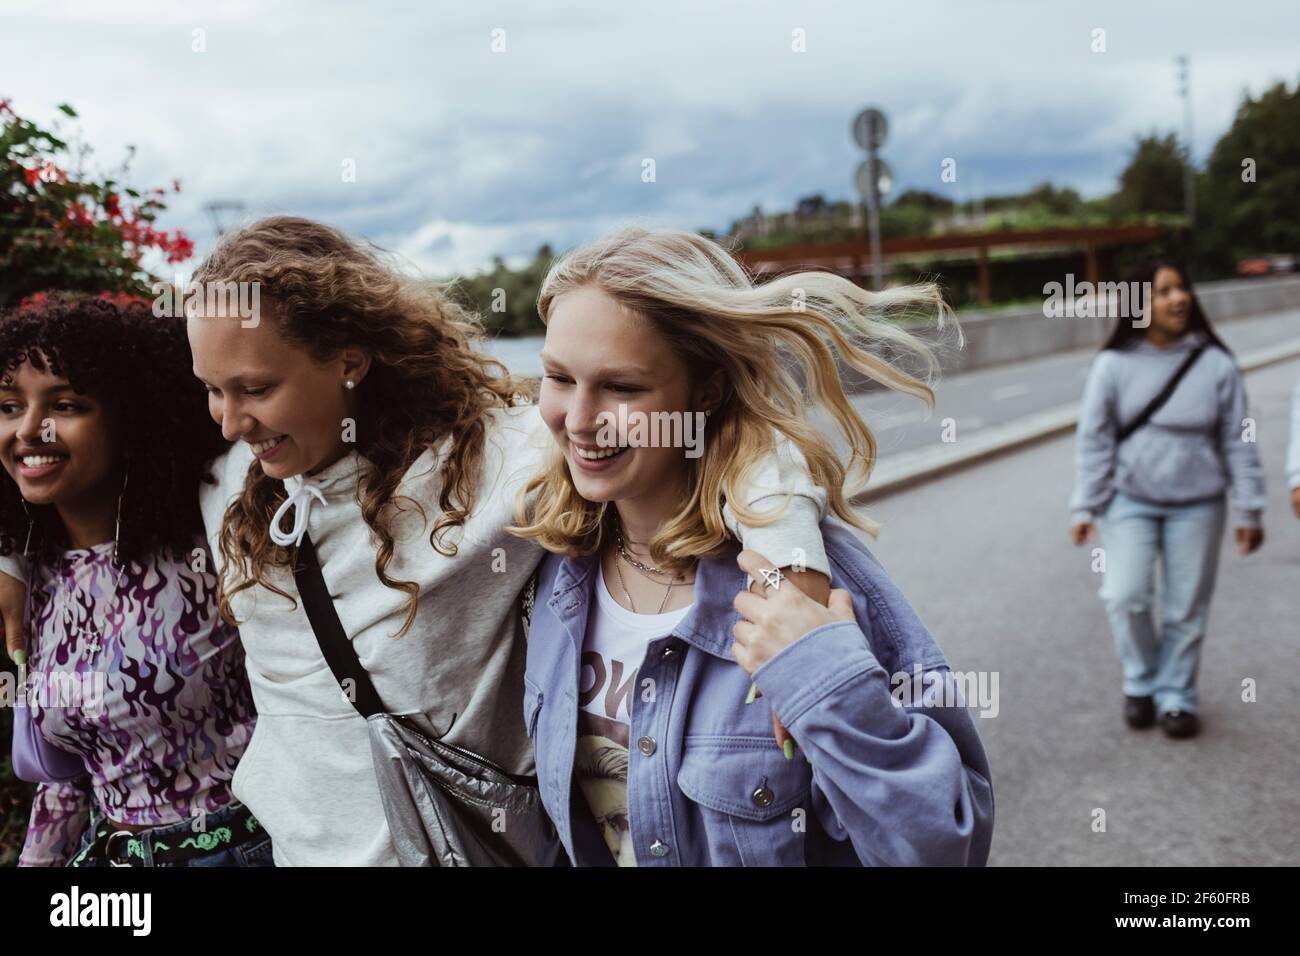 Smiling friends with arms around walking on footpath against sky Stock Photo